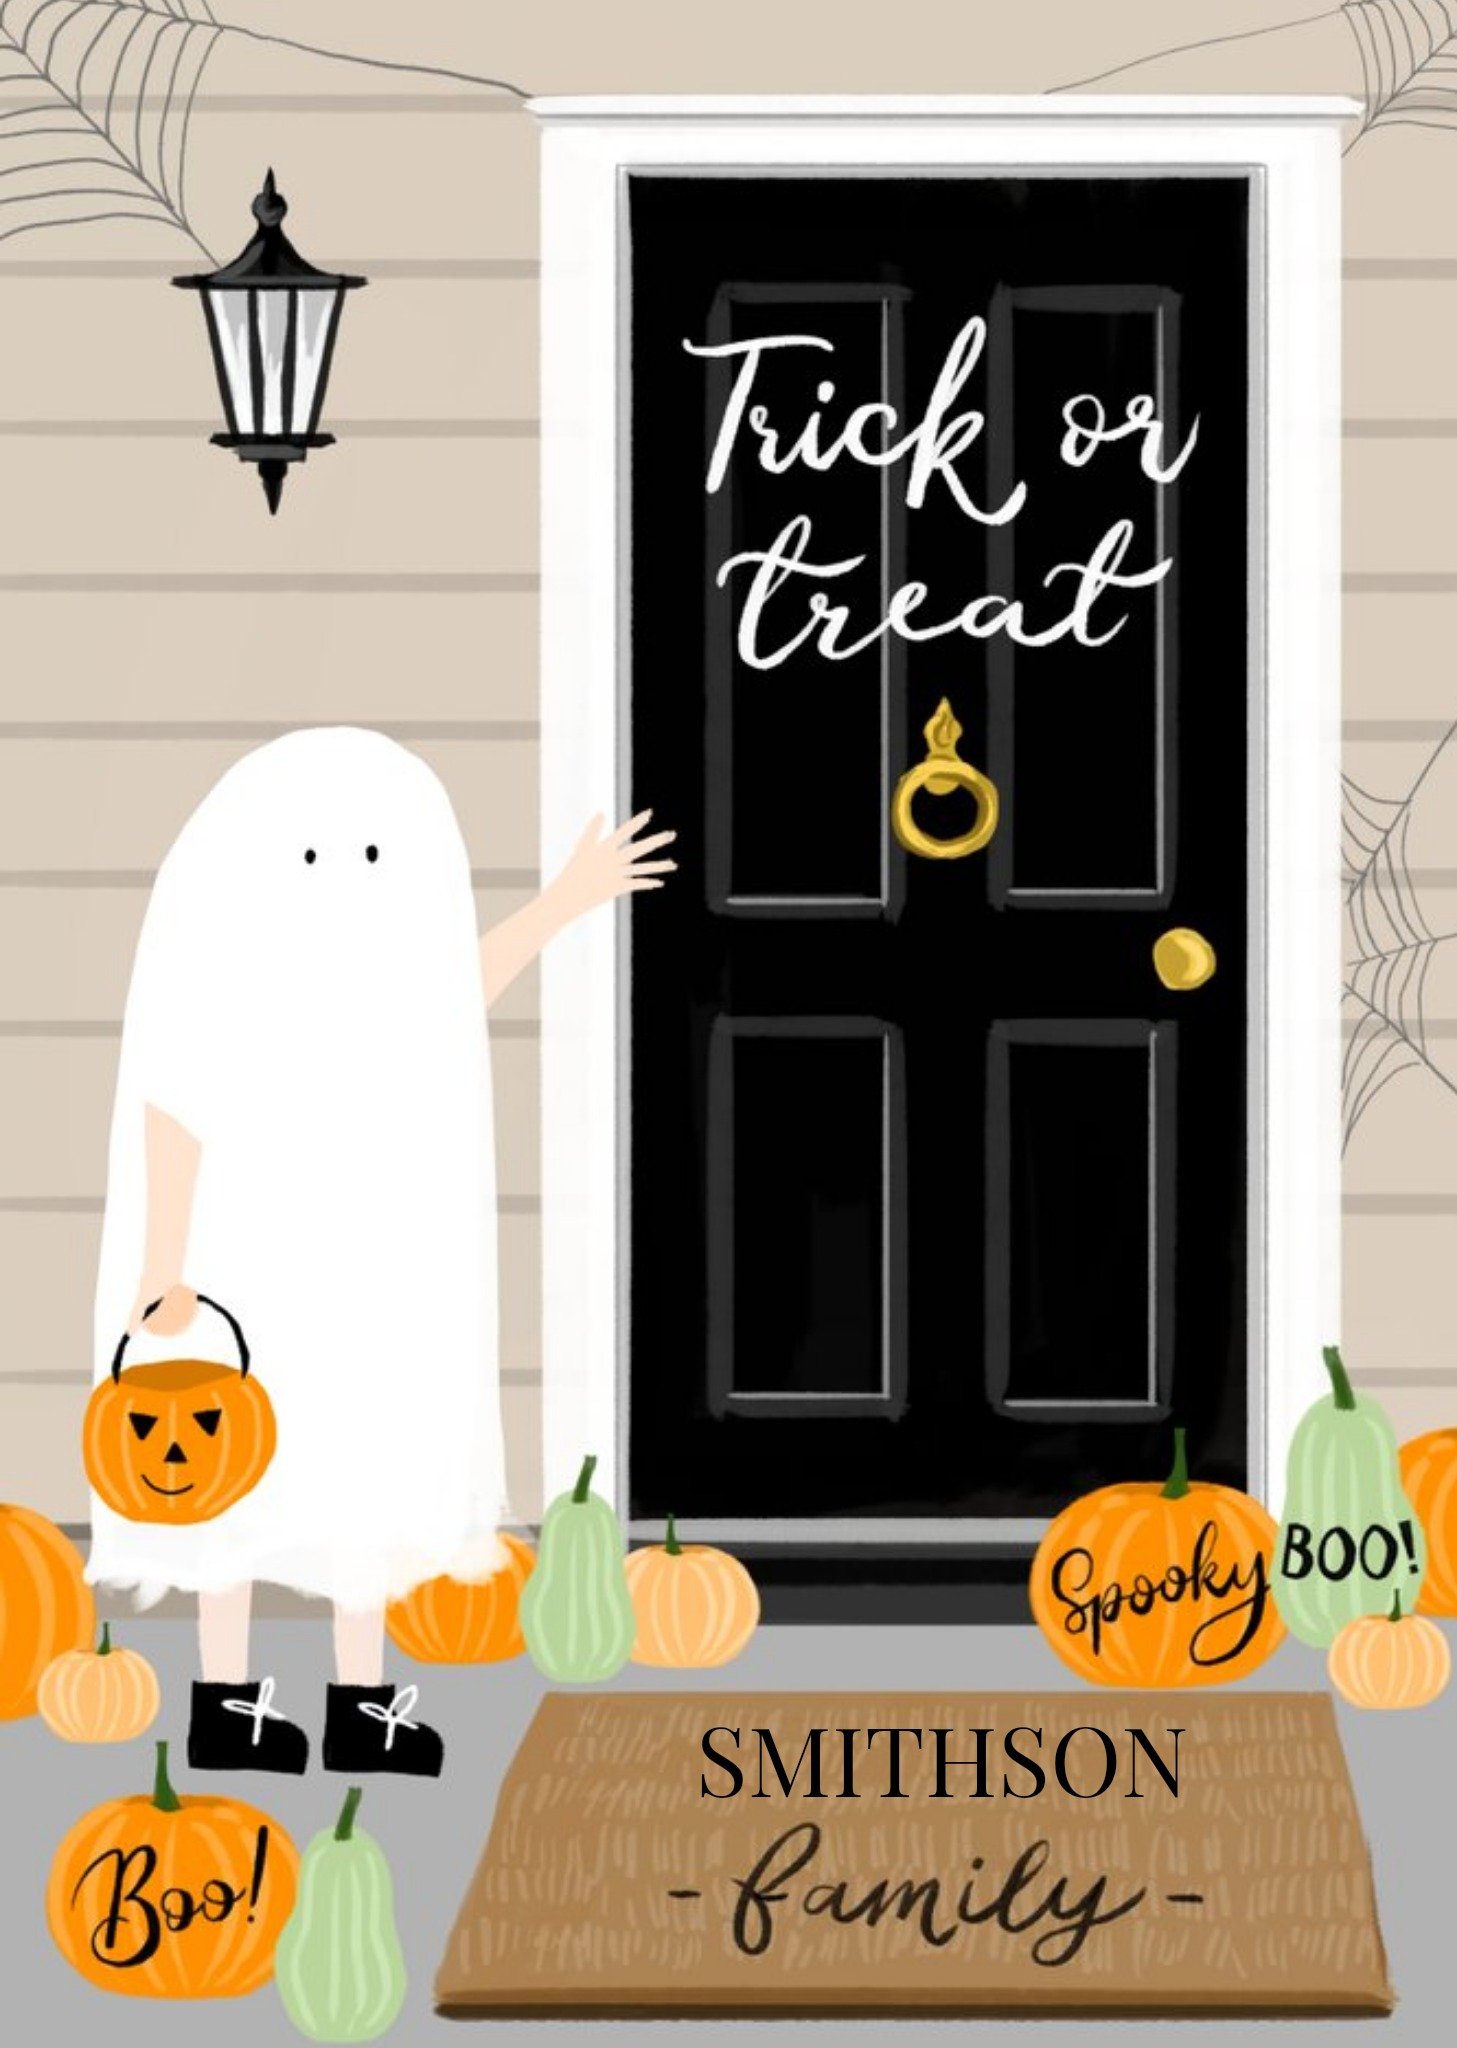 Okey Dokey Design Boo To You Ghost Trick Or Treat Halloween Card, Large